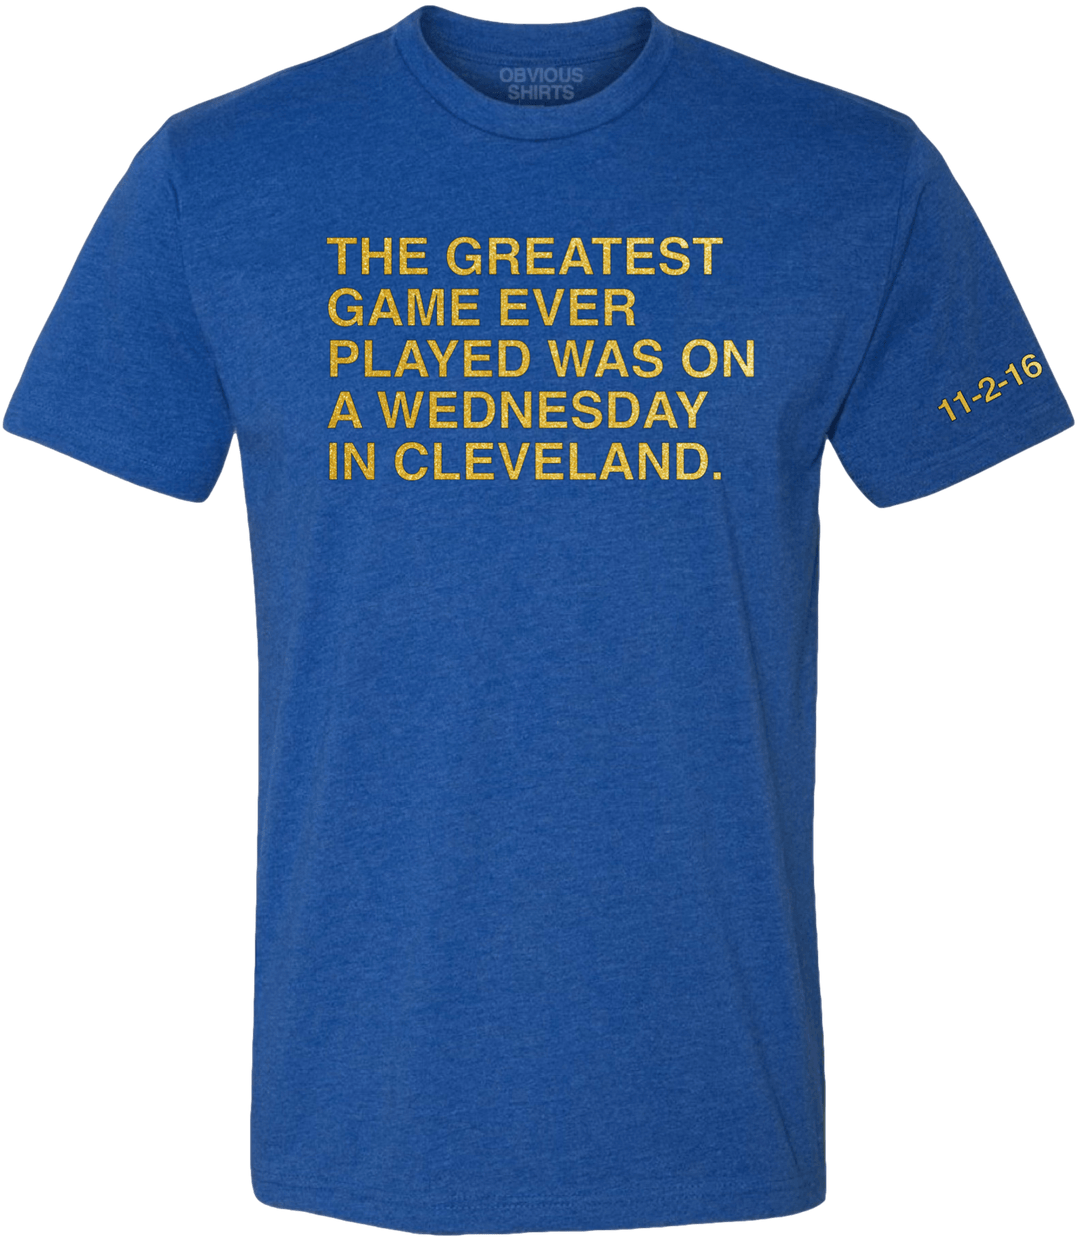 The greatest game ever played was on a Wednesday in Cleveland shirt